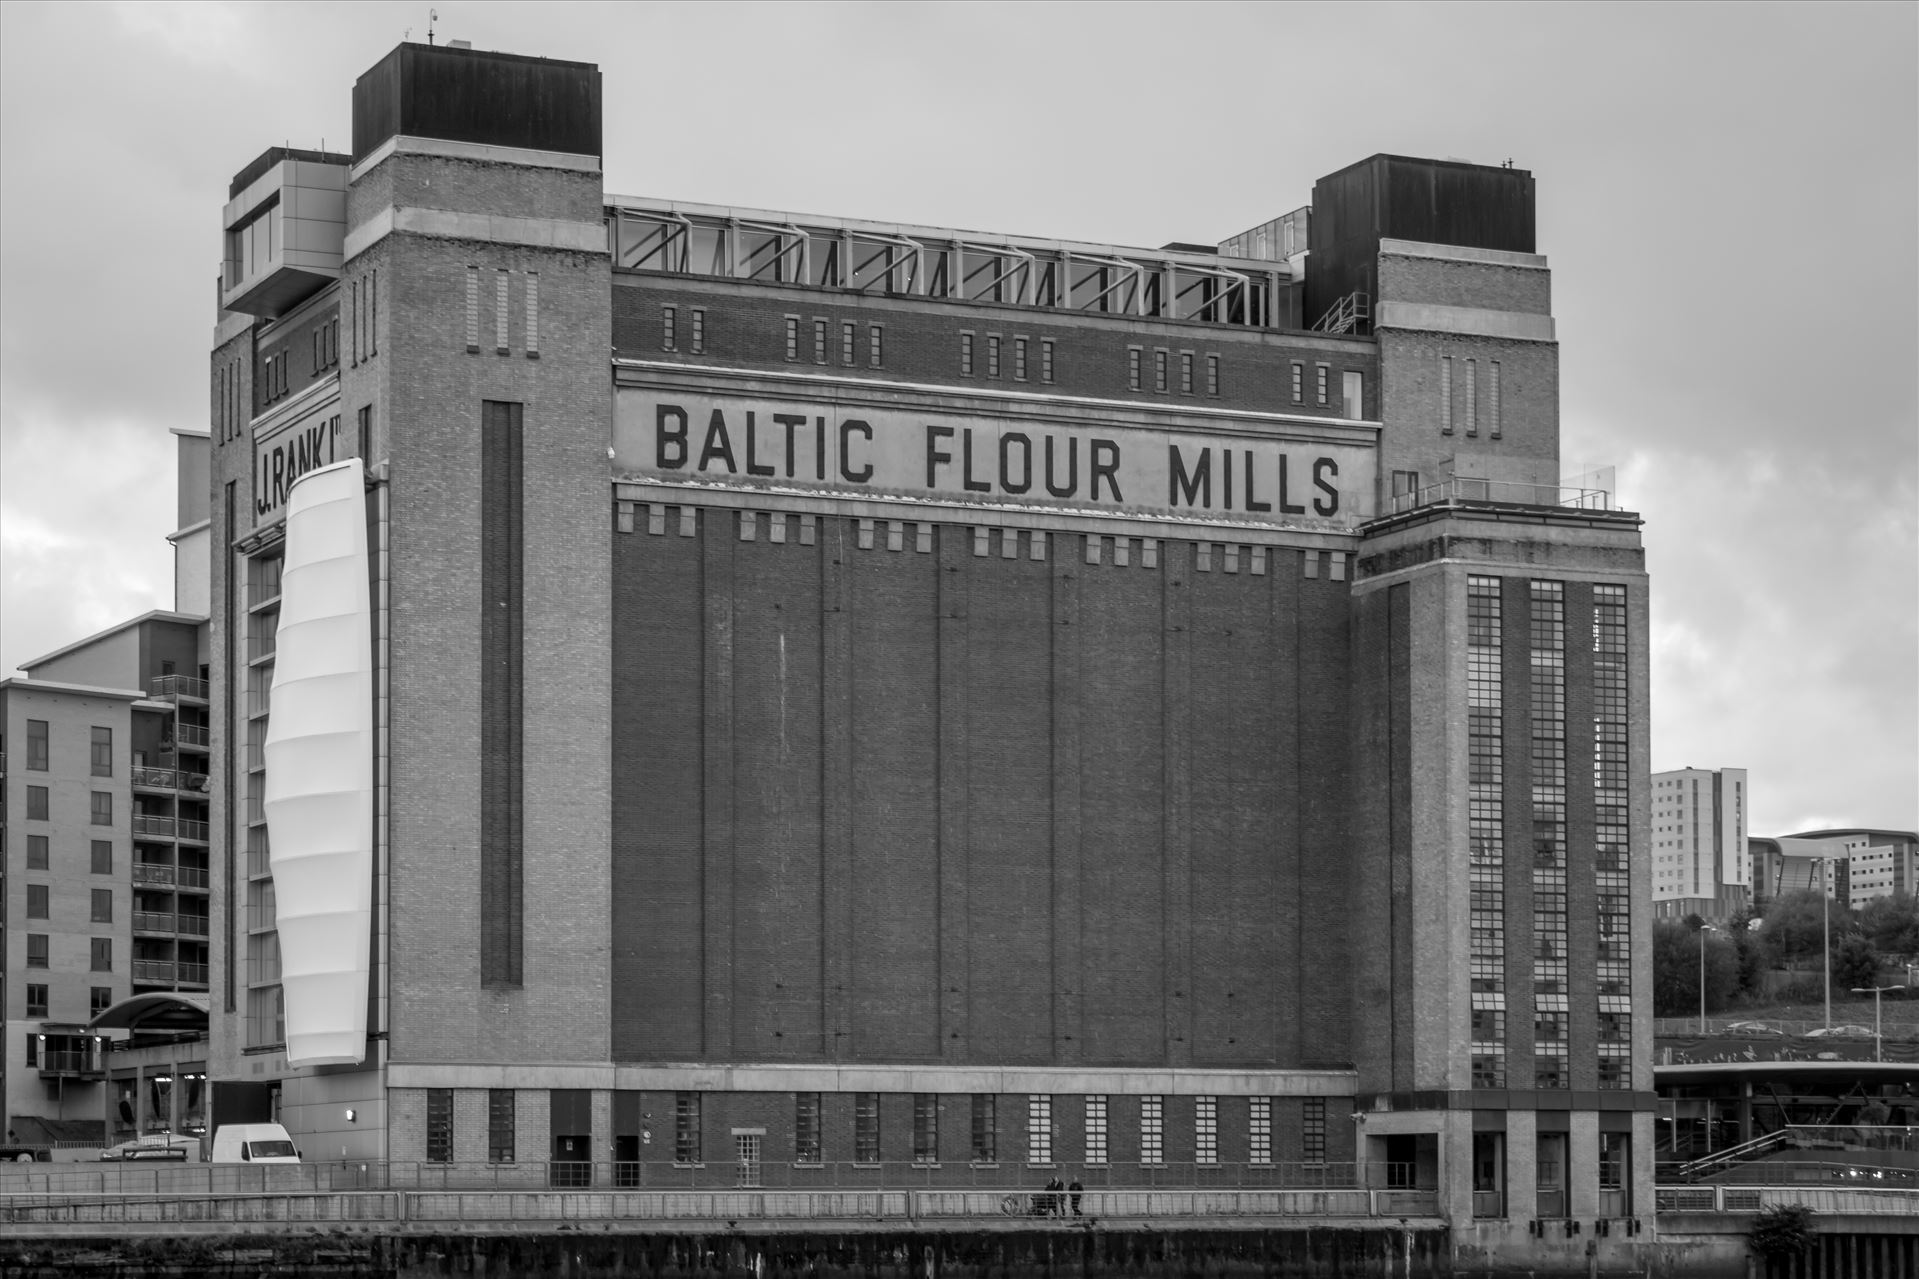 The Baltic, Gateshead Quayside - Housed in the Landmark, J R Rank Flour Mill building, its a major International centre for contemporary art. 2,600 square metres of art space, and boasts a rooftop restaurant with magnificent view of the River Tyne and Quayside. by Graham Dobson Photography